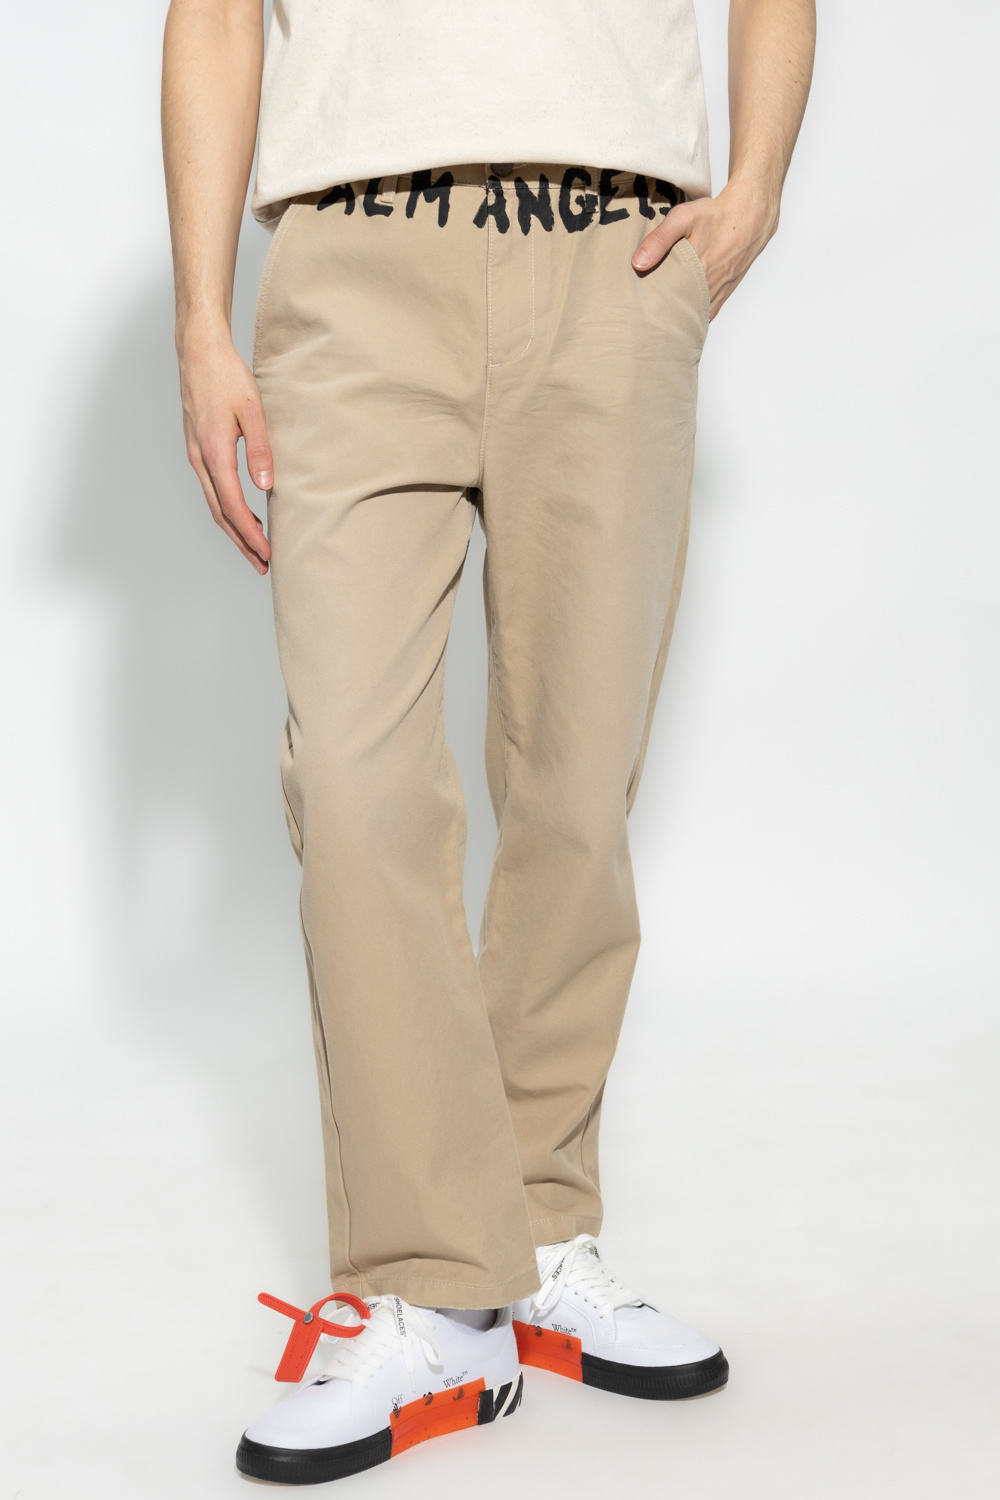 Palm Angels Maxi trousers with logo